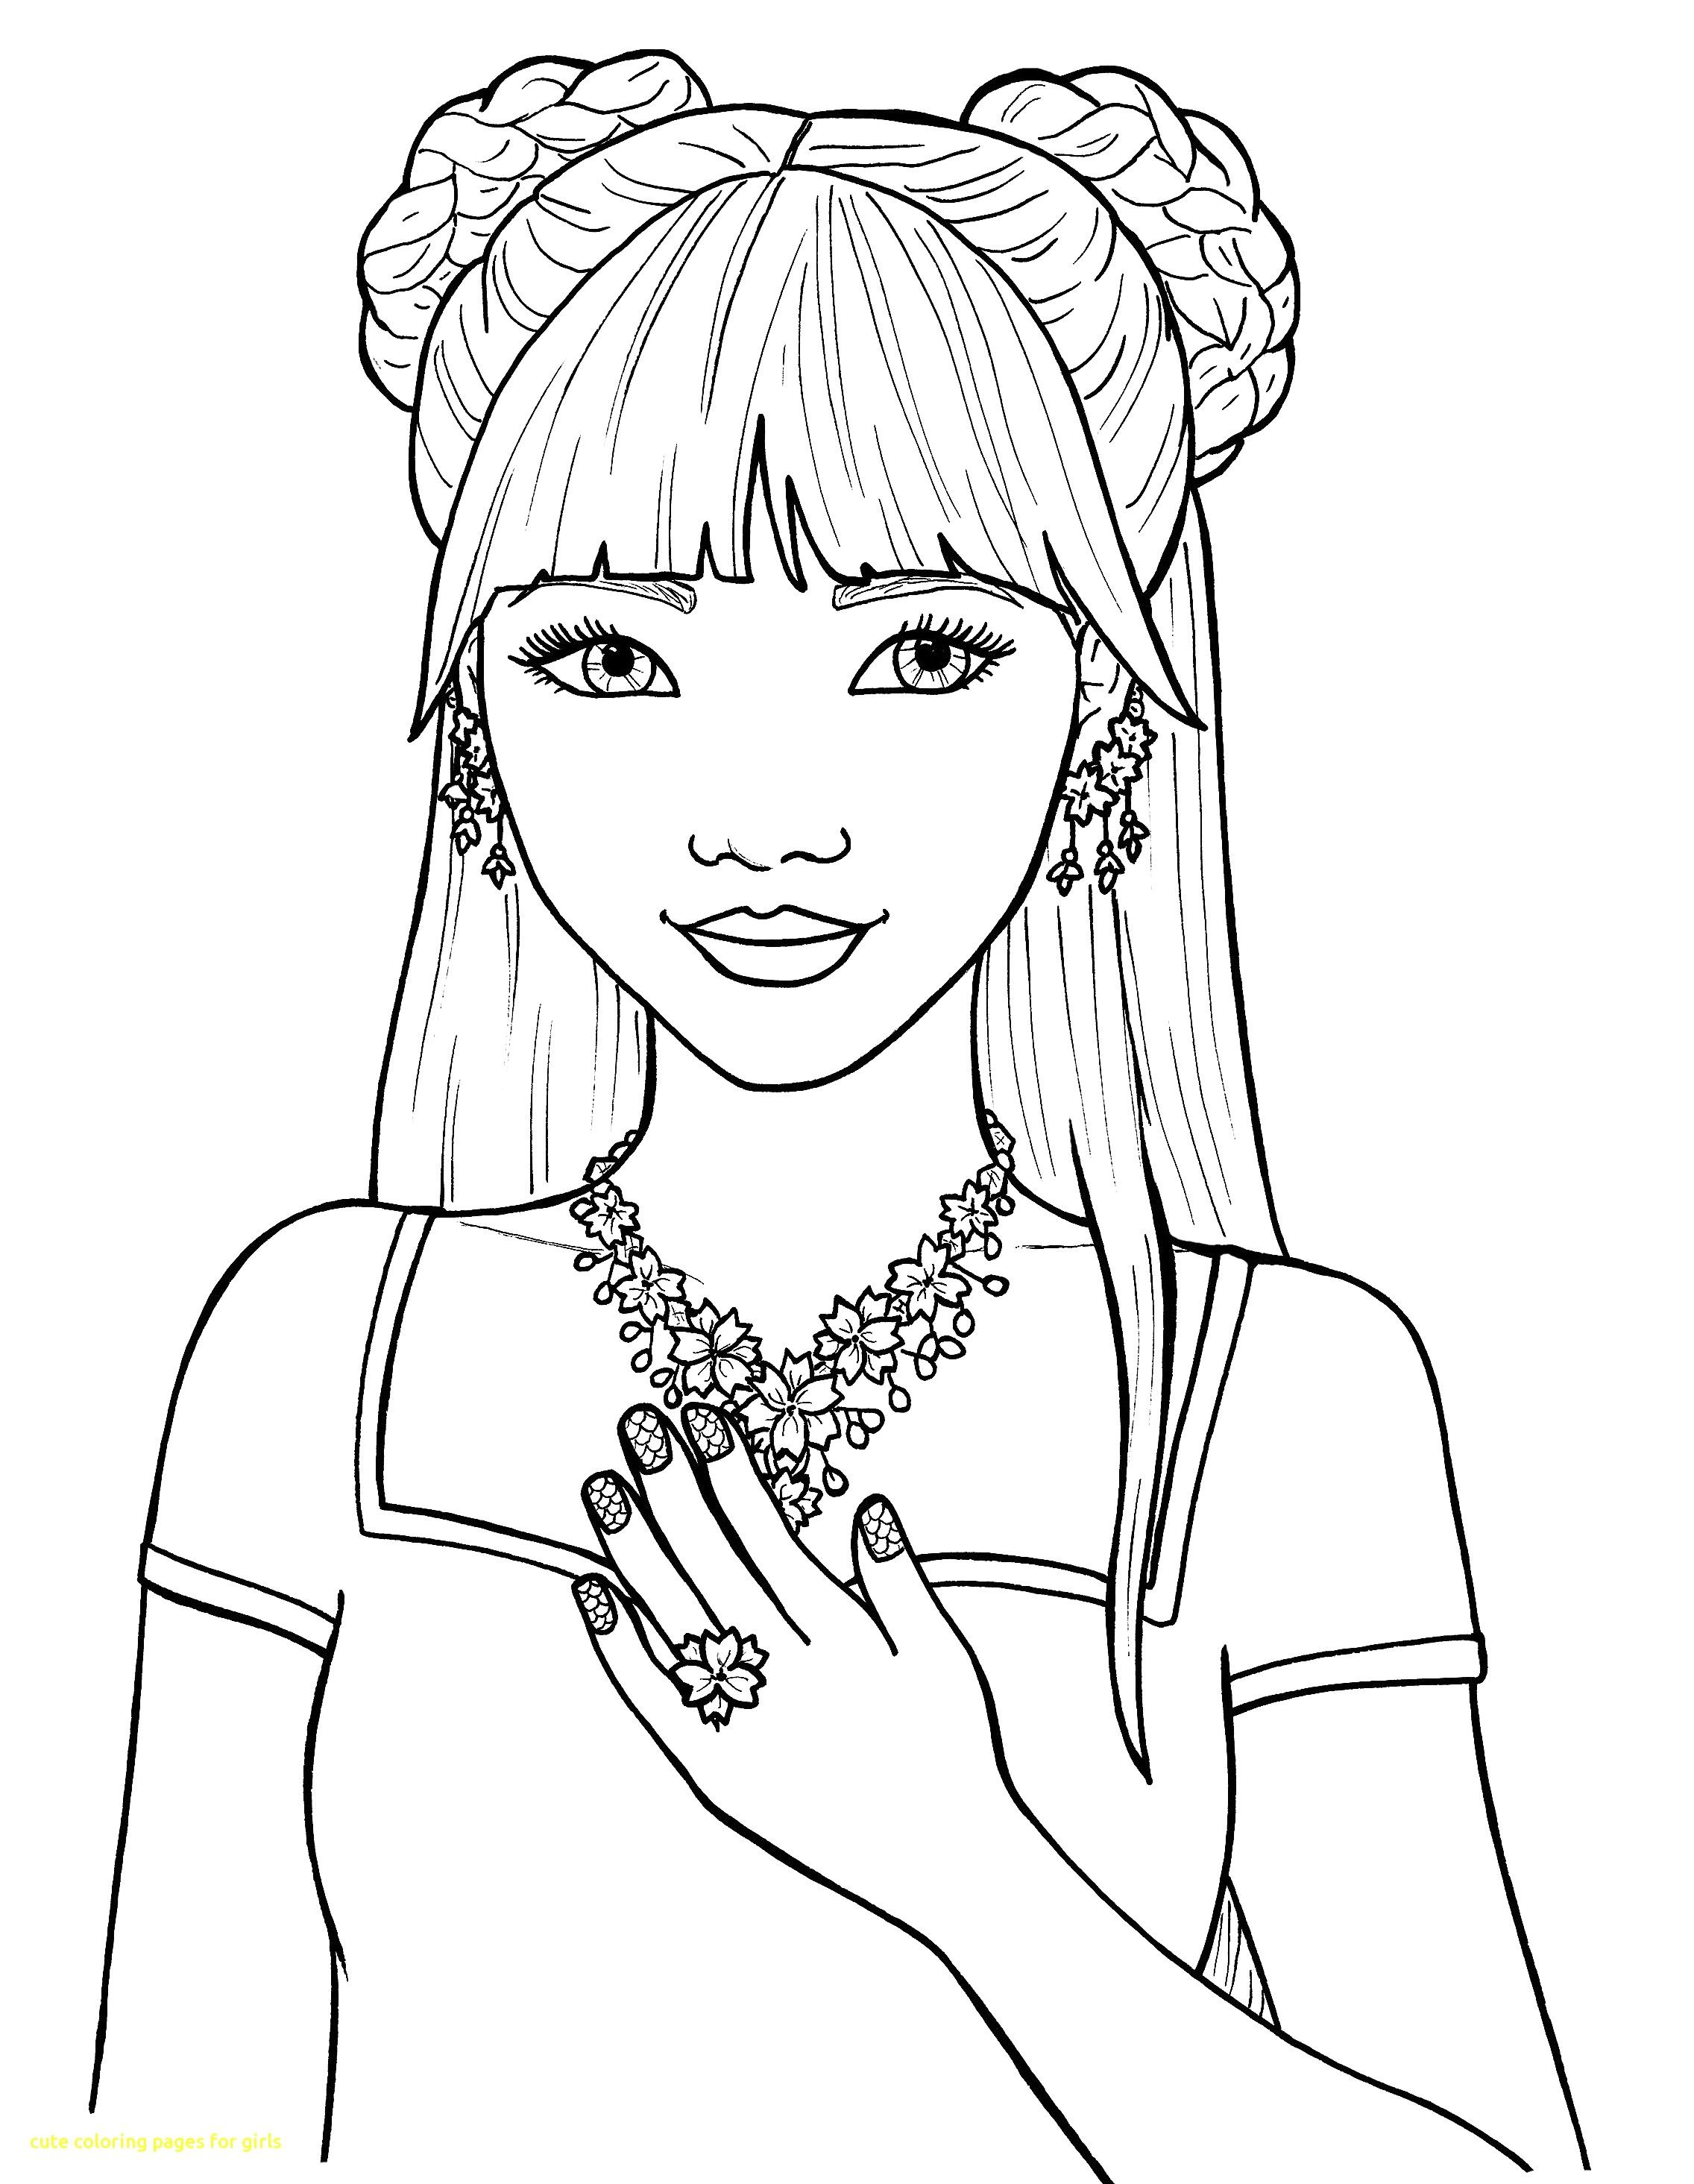 Coloring Page Girl Coloring Pages Coloring Pages Cute For Girls With Of Inside Teens